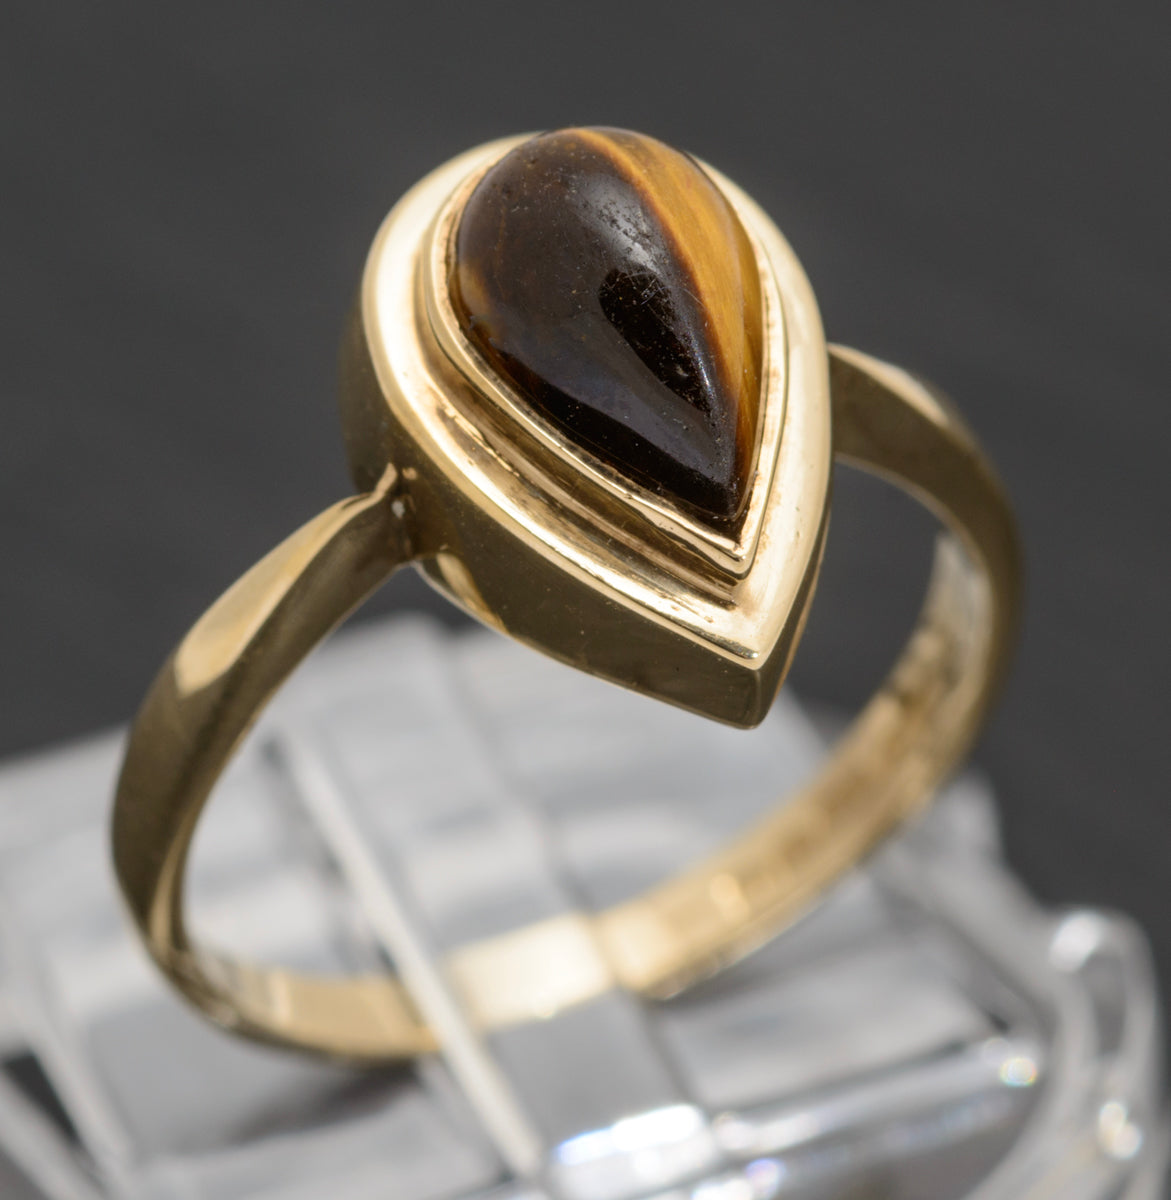 Vintage 9ct Gold Ring With Teardrop Tigers Eye Polished Cabochon 1979 Hallmark (A1632)